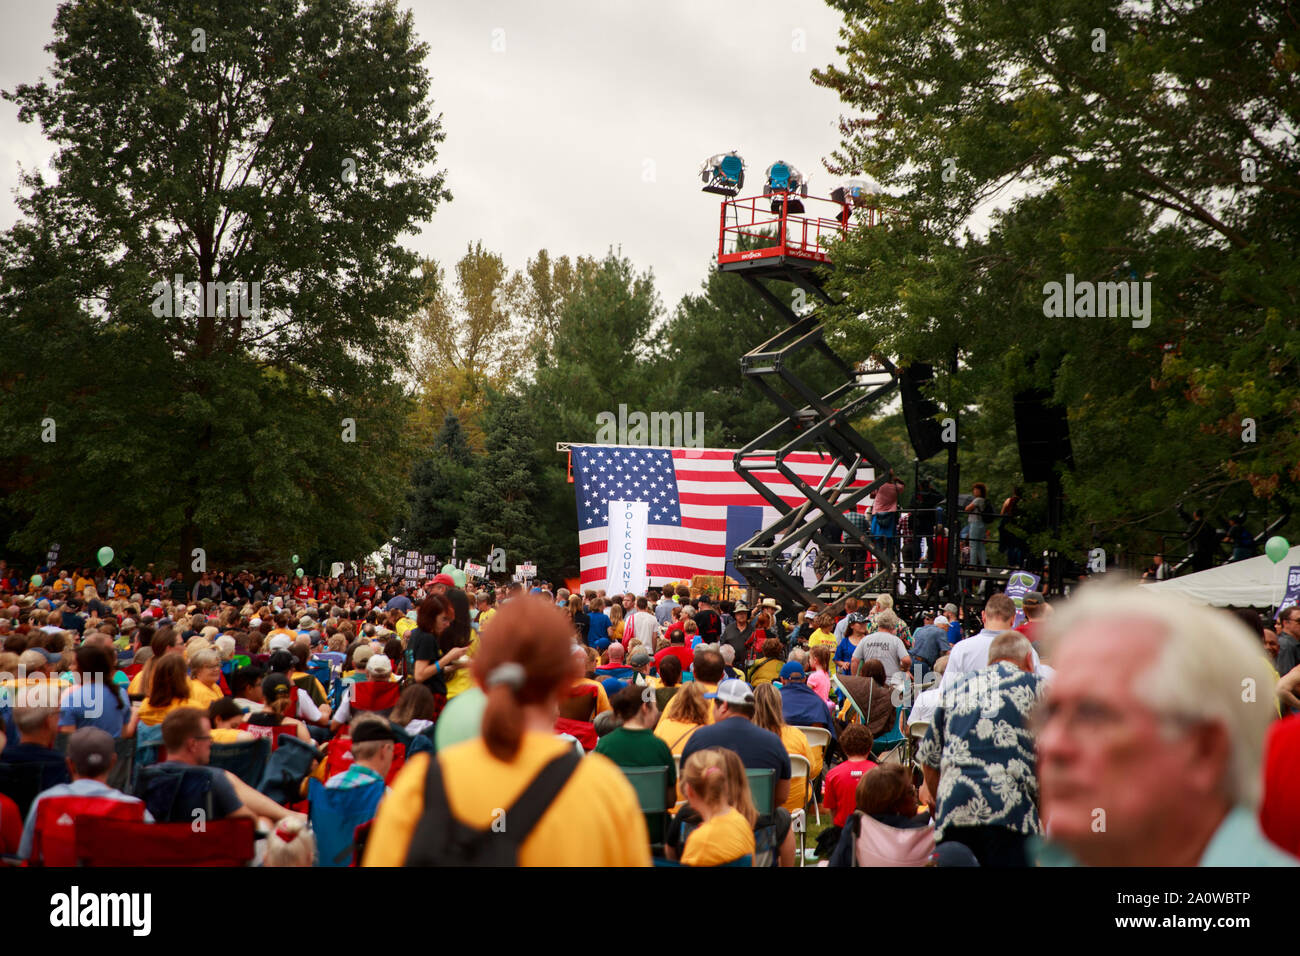 A crowd gathers during the Polk County Steak Fry, Saturday, September 21, 2019 at Water Works Park in Des Moines, Iowa. The steak fry was the largest in Iowa's history and was attended by 12,000 Democrats from around Iowa. The event drew in 17 candidates for the democratic nomination for president of the United States. The Iowa Caucasus are Monday, February 3, 2020 and although not a primary will narrow down the field of candidates for president before the first election primary in the state of New Hampshire. Stock Photo